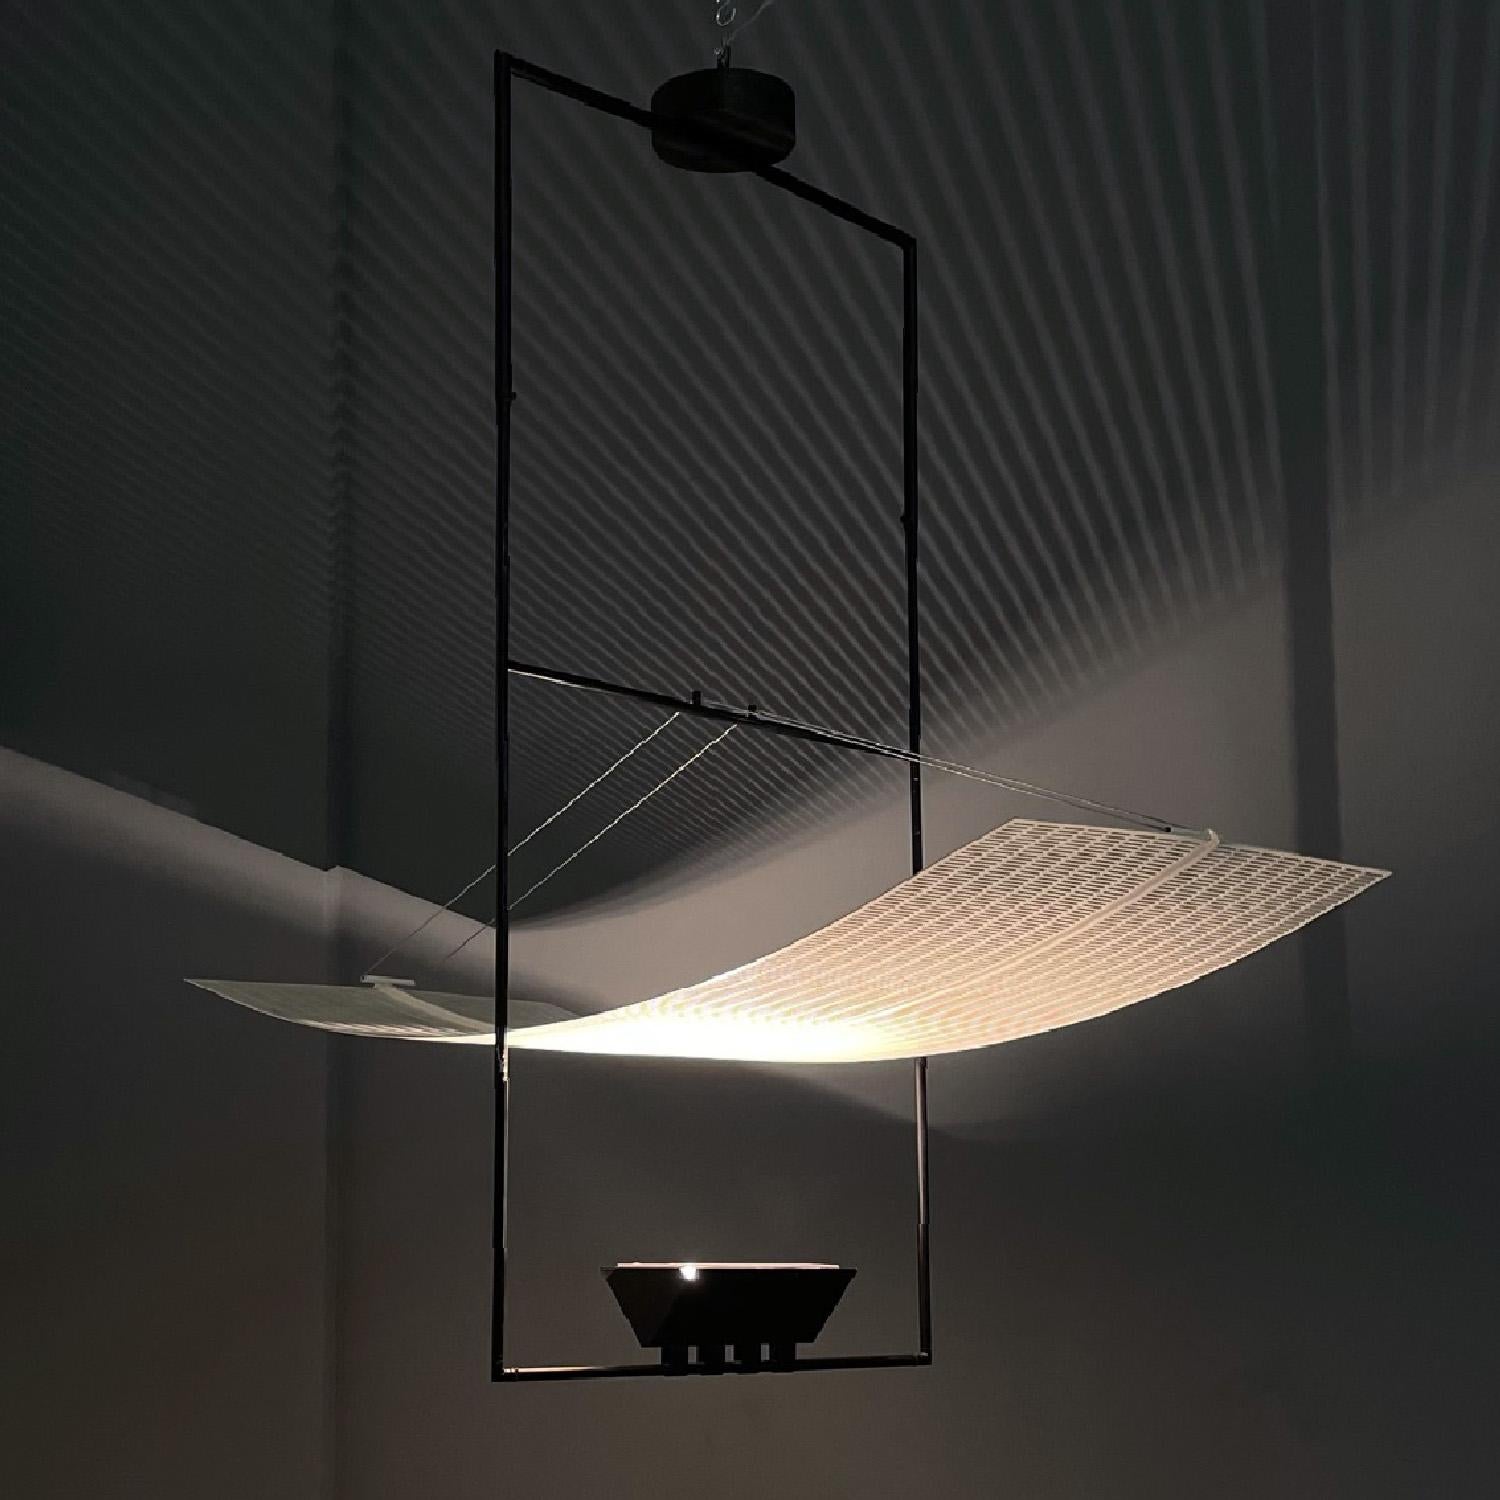 Italian modern white black chandelier Zefiro by Mario Botta for Artemide, 1990s
Chandelier mod. Zefiro with black metal rod structure in the center of which a curved perforated and white enamelled metal sheet is suspended by wires. Below this sheet